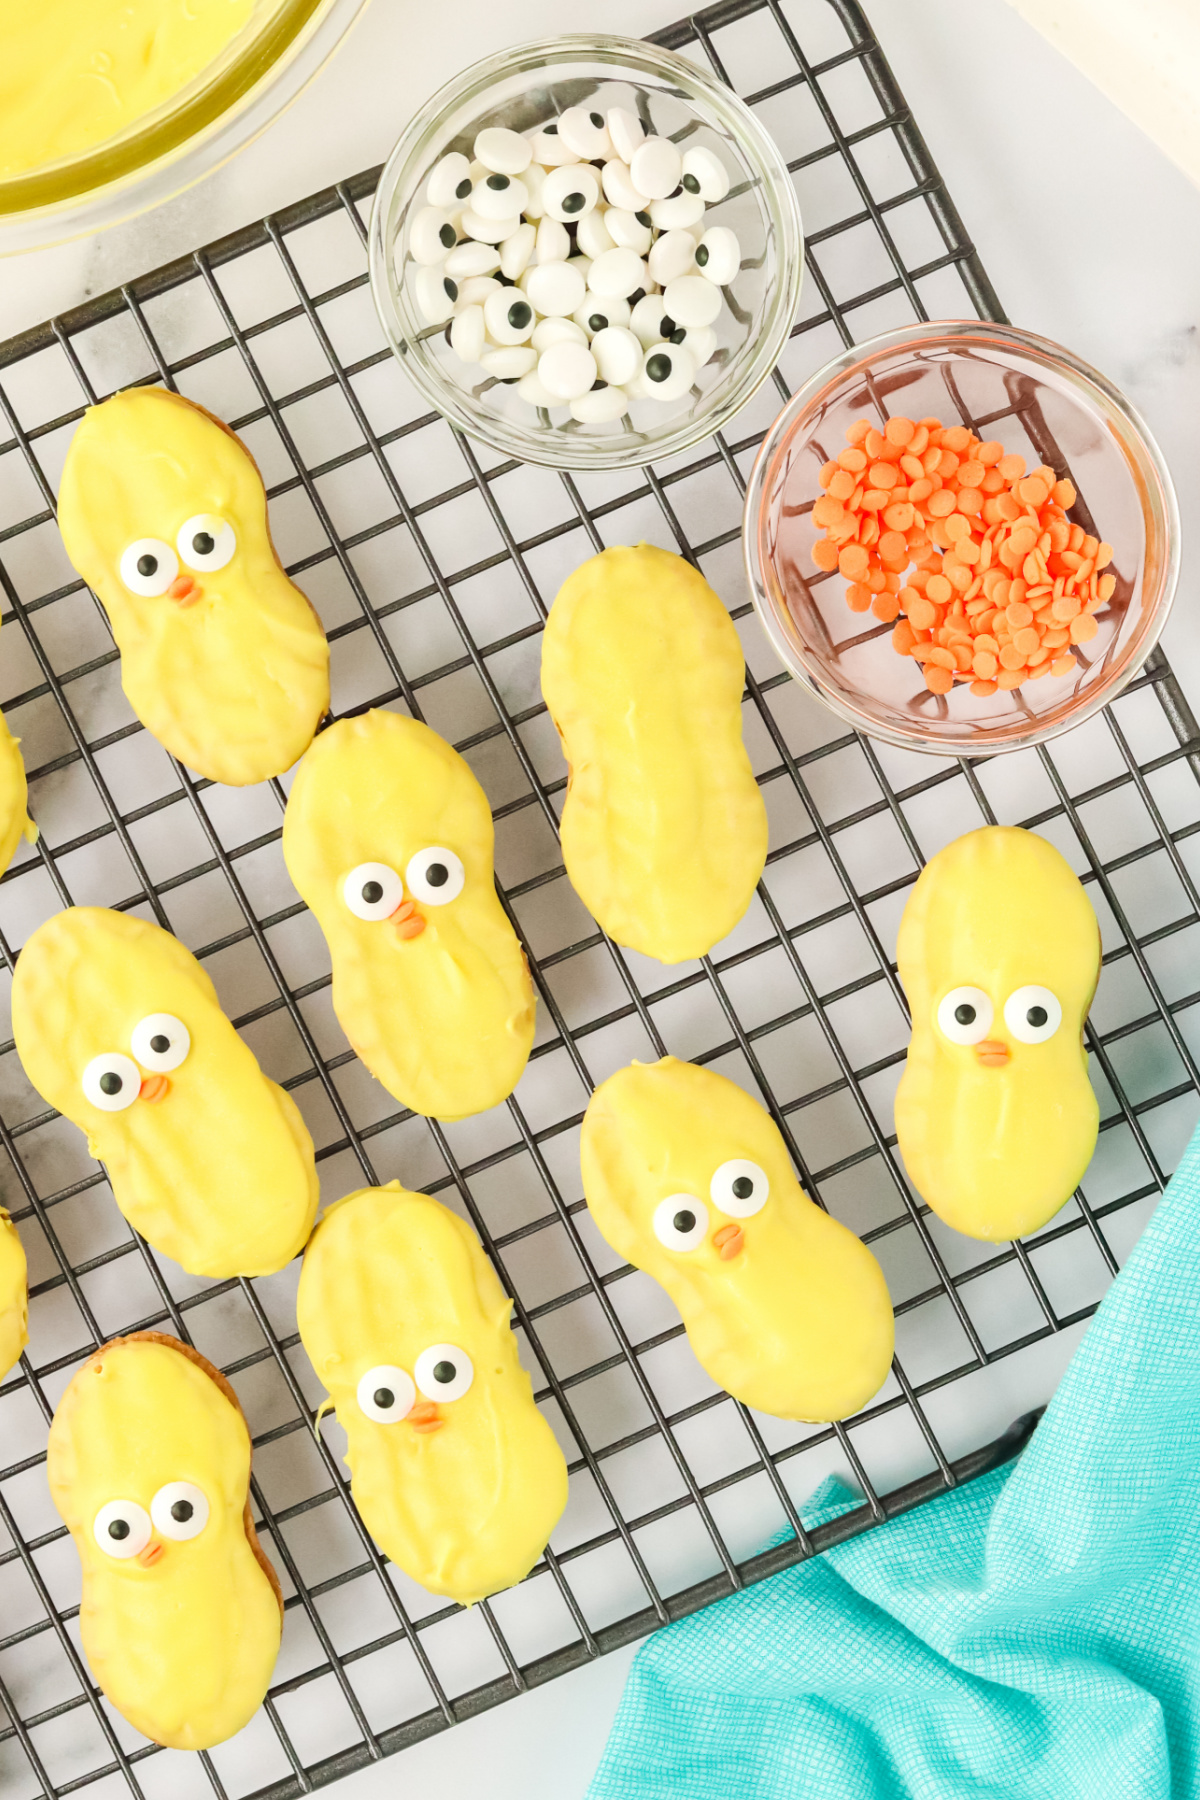 Decorated chick-shaped cookies with candy eyes on a cooling rack, with ingredients nearby.